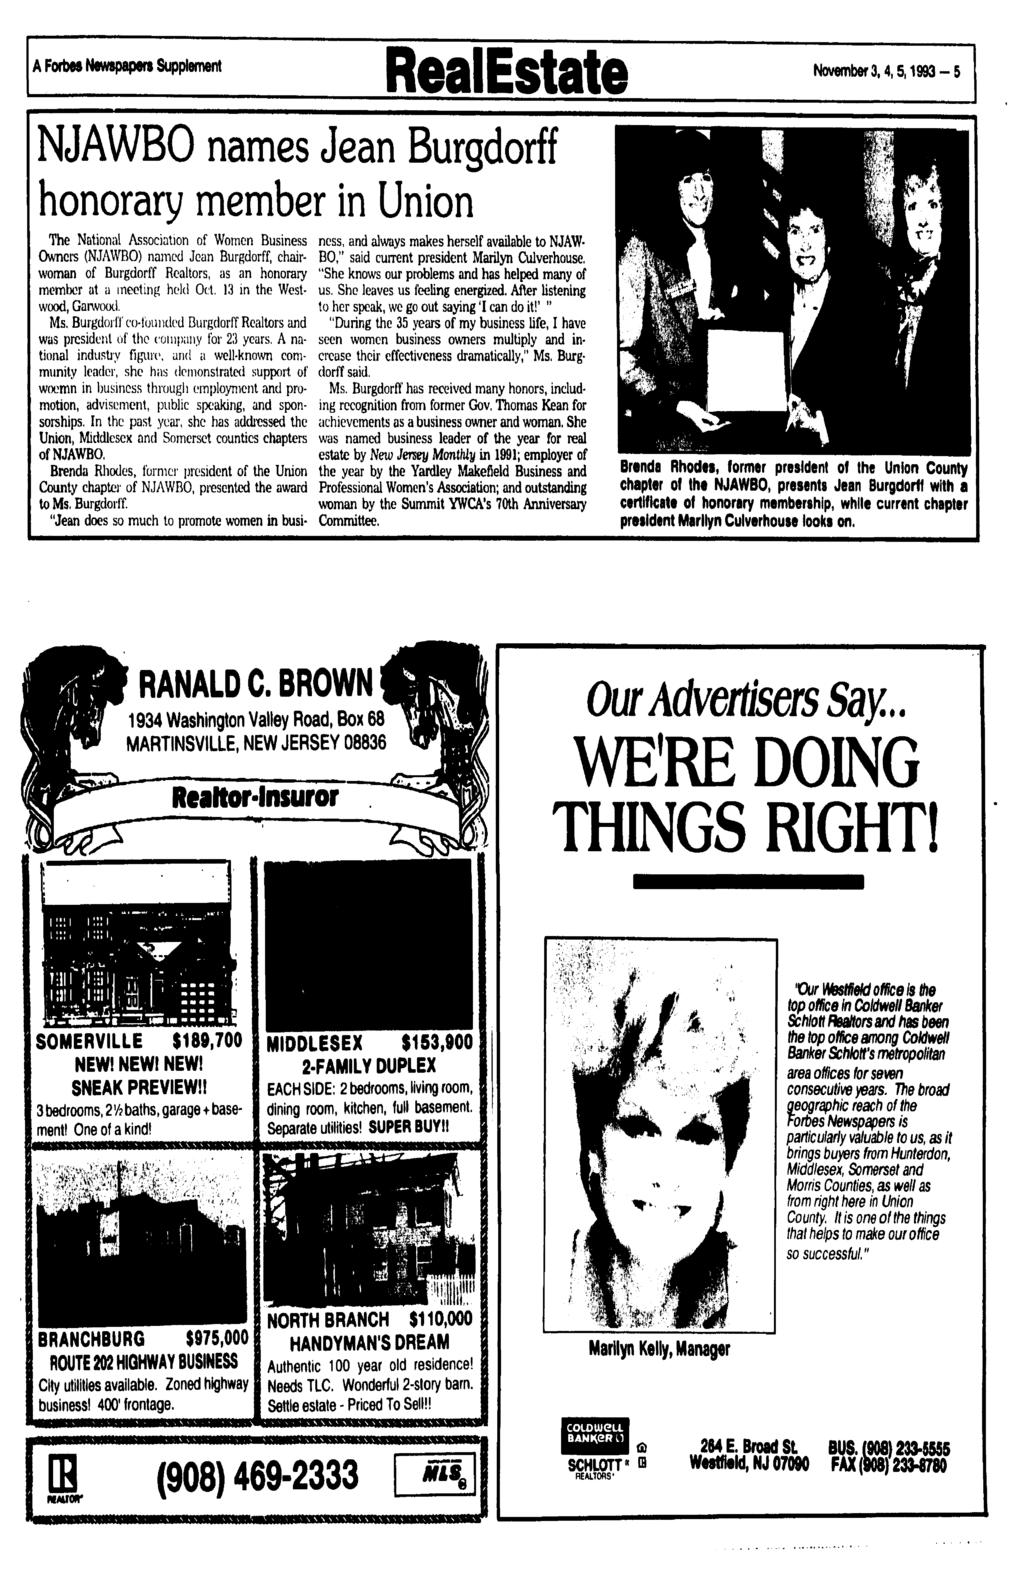 A Forbes Newspapers Supplement RealEstate November3,4,5,1993-5 NJAWBO names Jean Burgdorff honorary member in Union The National Association of Women Business Owners (NJAWBO) named Jean Burgdorff,